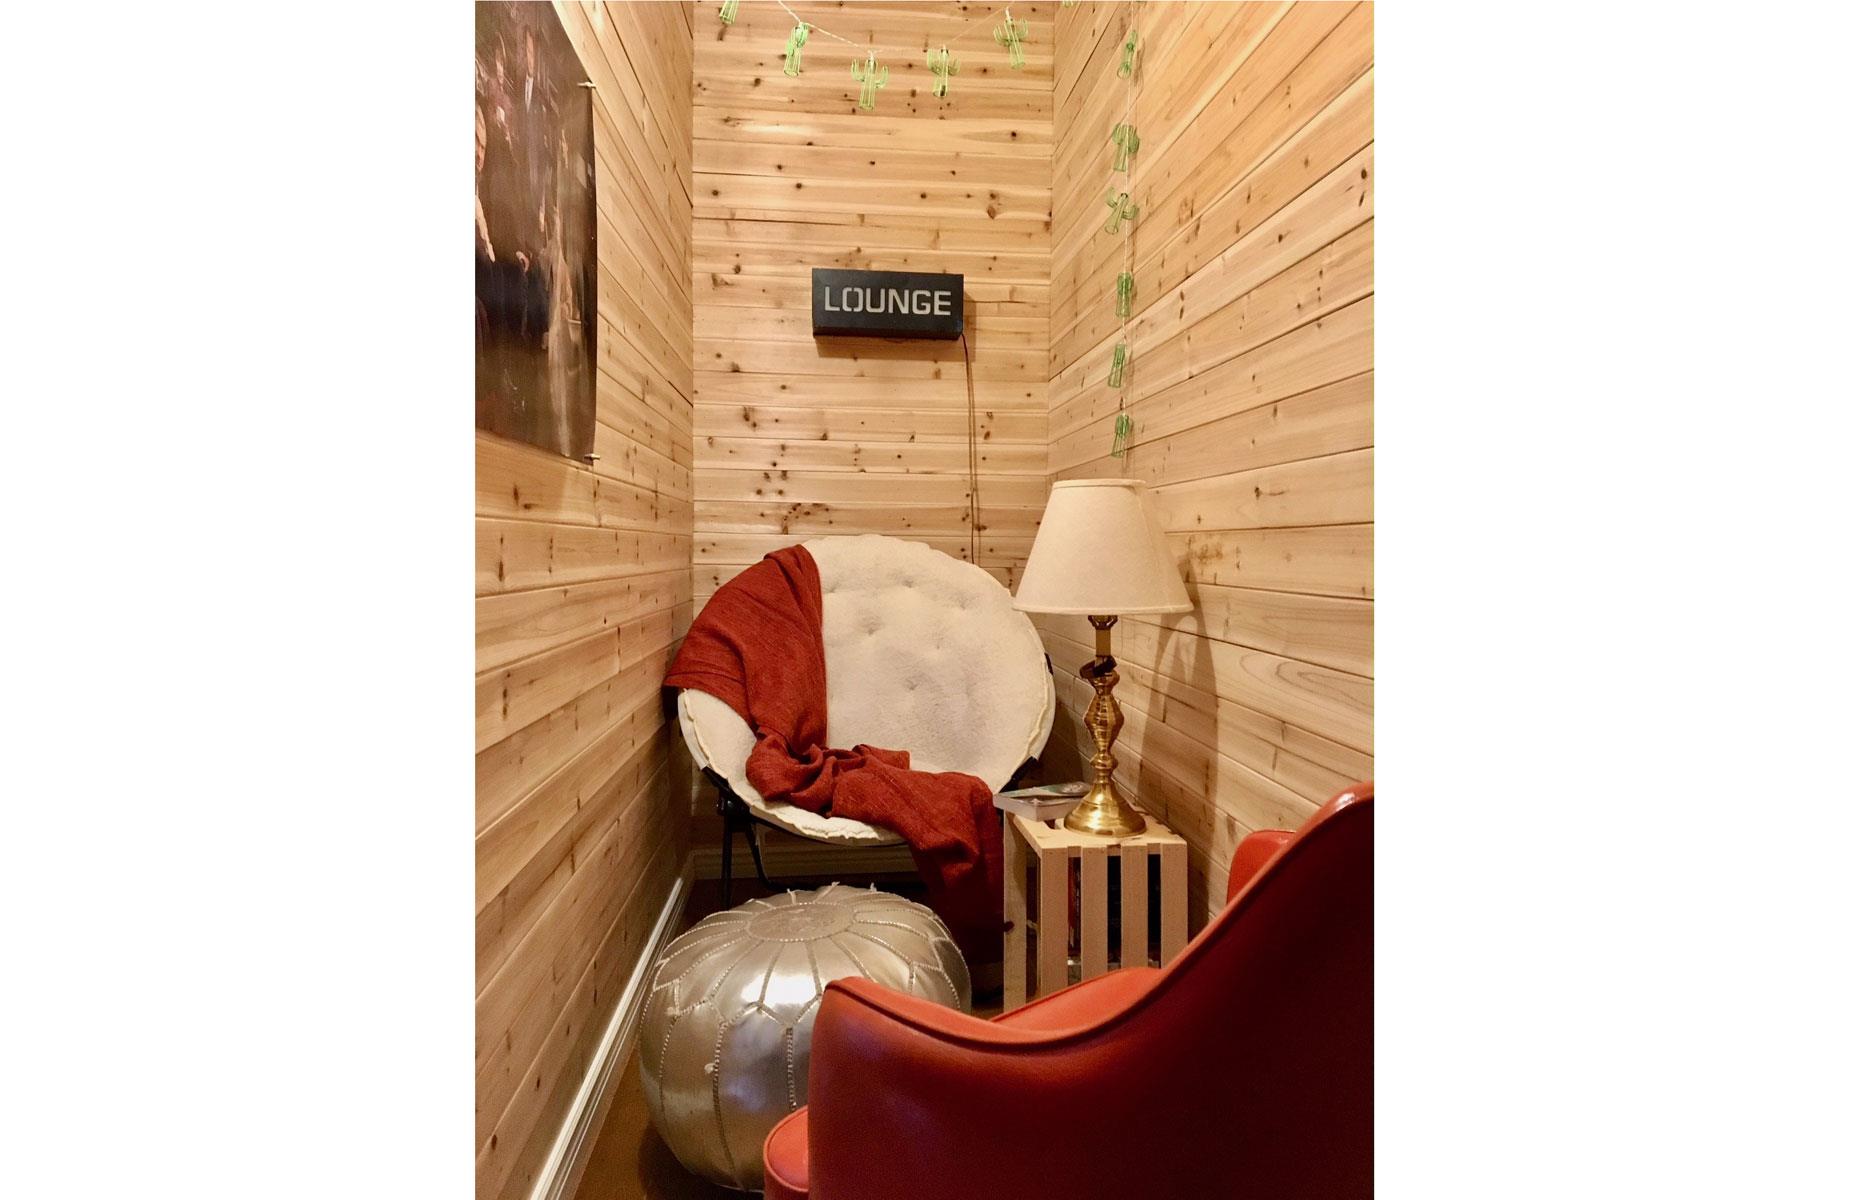 <p>How's this for a clever <a href="https://www.loveproperty.com/gallerylist/93543/amazing-closet-makeovers-reading-nooks-home-bars-and-makeup-stations">closet transformation</a>? A teen-friendly take on the secret closet room, this cozy hangout was created by interior designer <a href="http://www.gildedinterior.com/">Laura Medicus</a> for her daughter Sylvia by simply walling off the existing walk-in closet and cutting off the back of an old armoire to make the 'door'.</p>